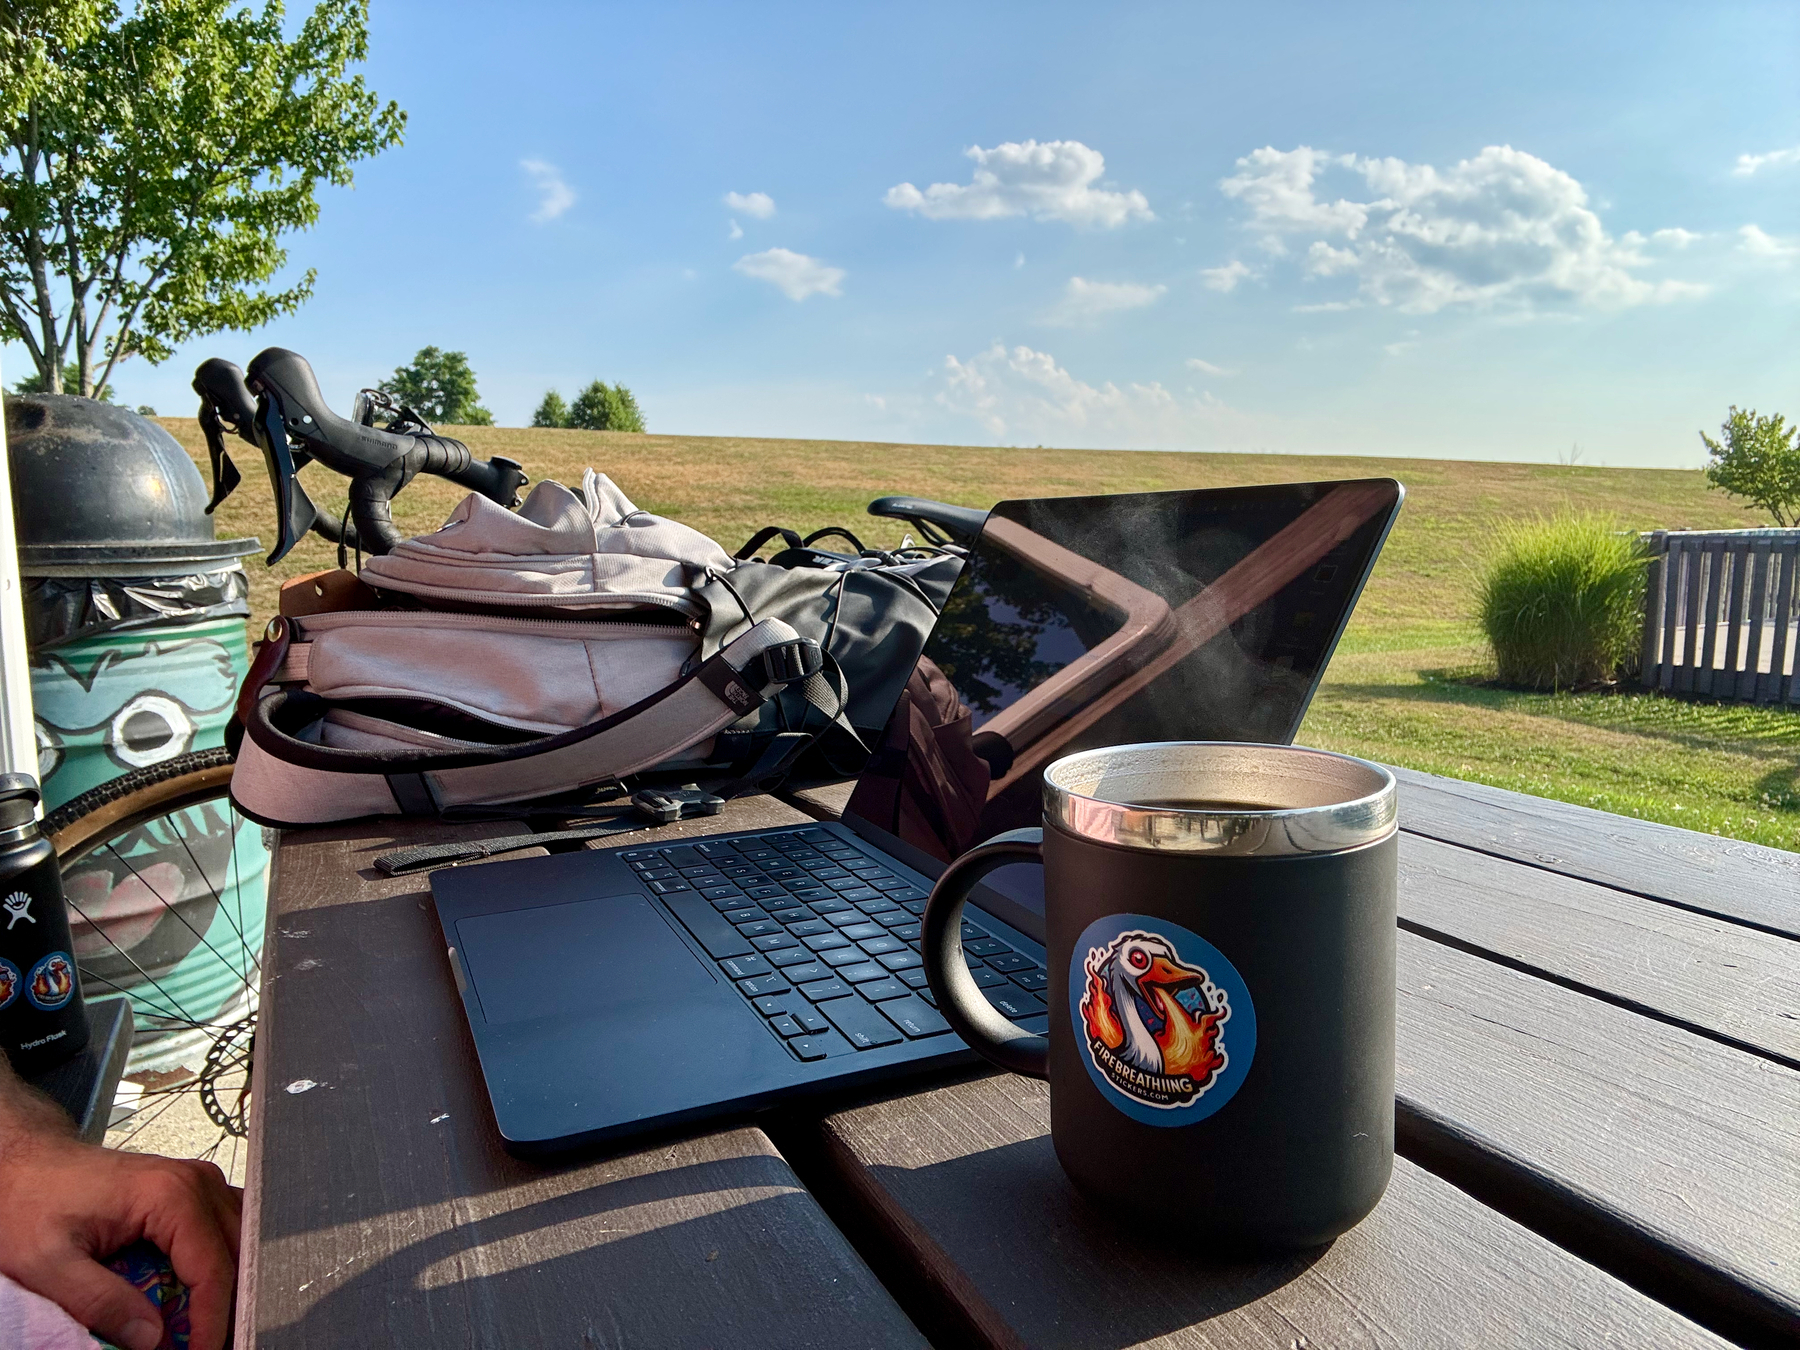 Auto-generated description: A laptop, mug, backpack sit on a picnic table outdoors with a scenic, grassy landscape and trees, and a bicylce in the background.